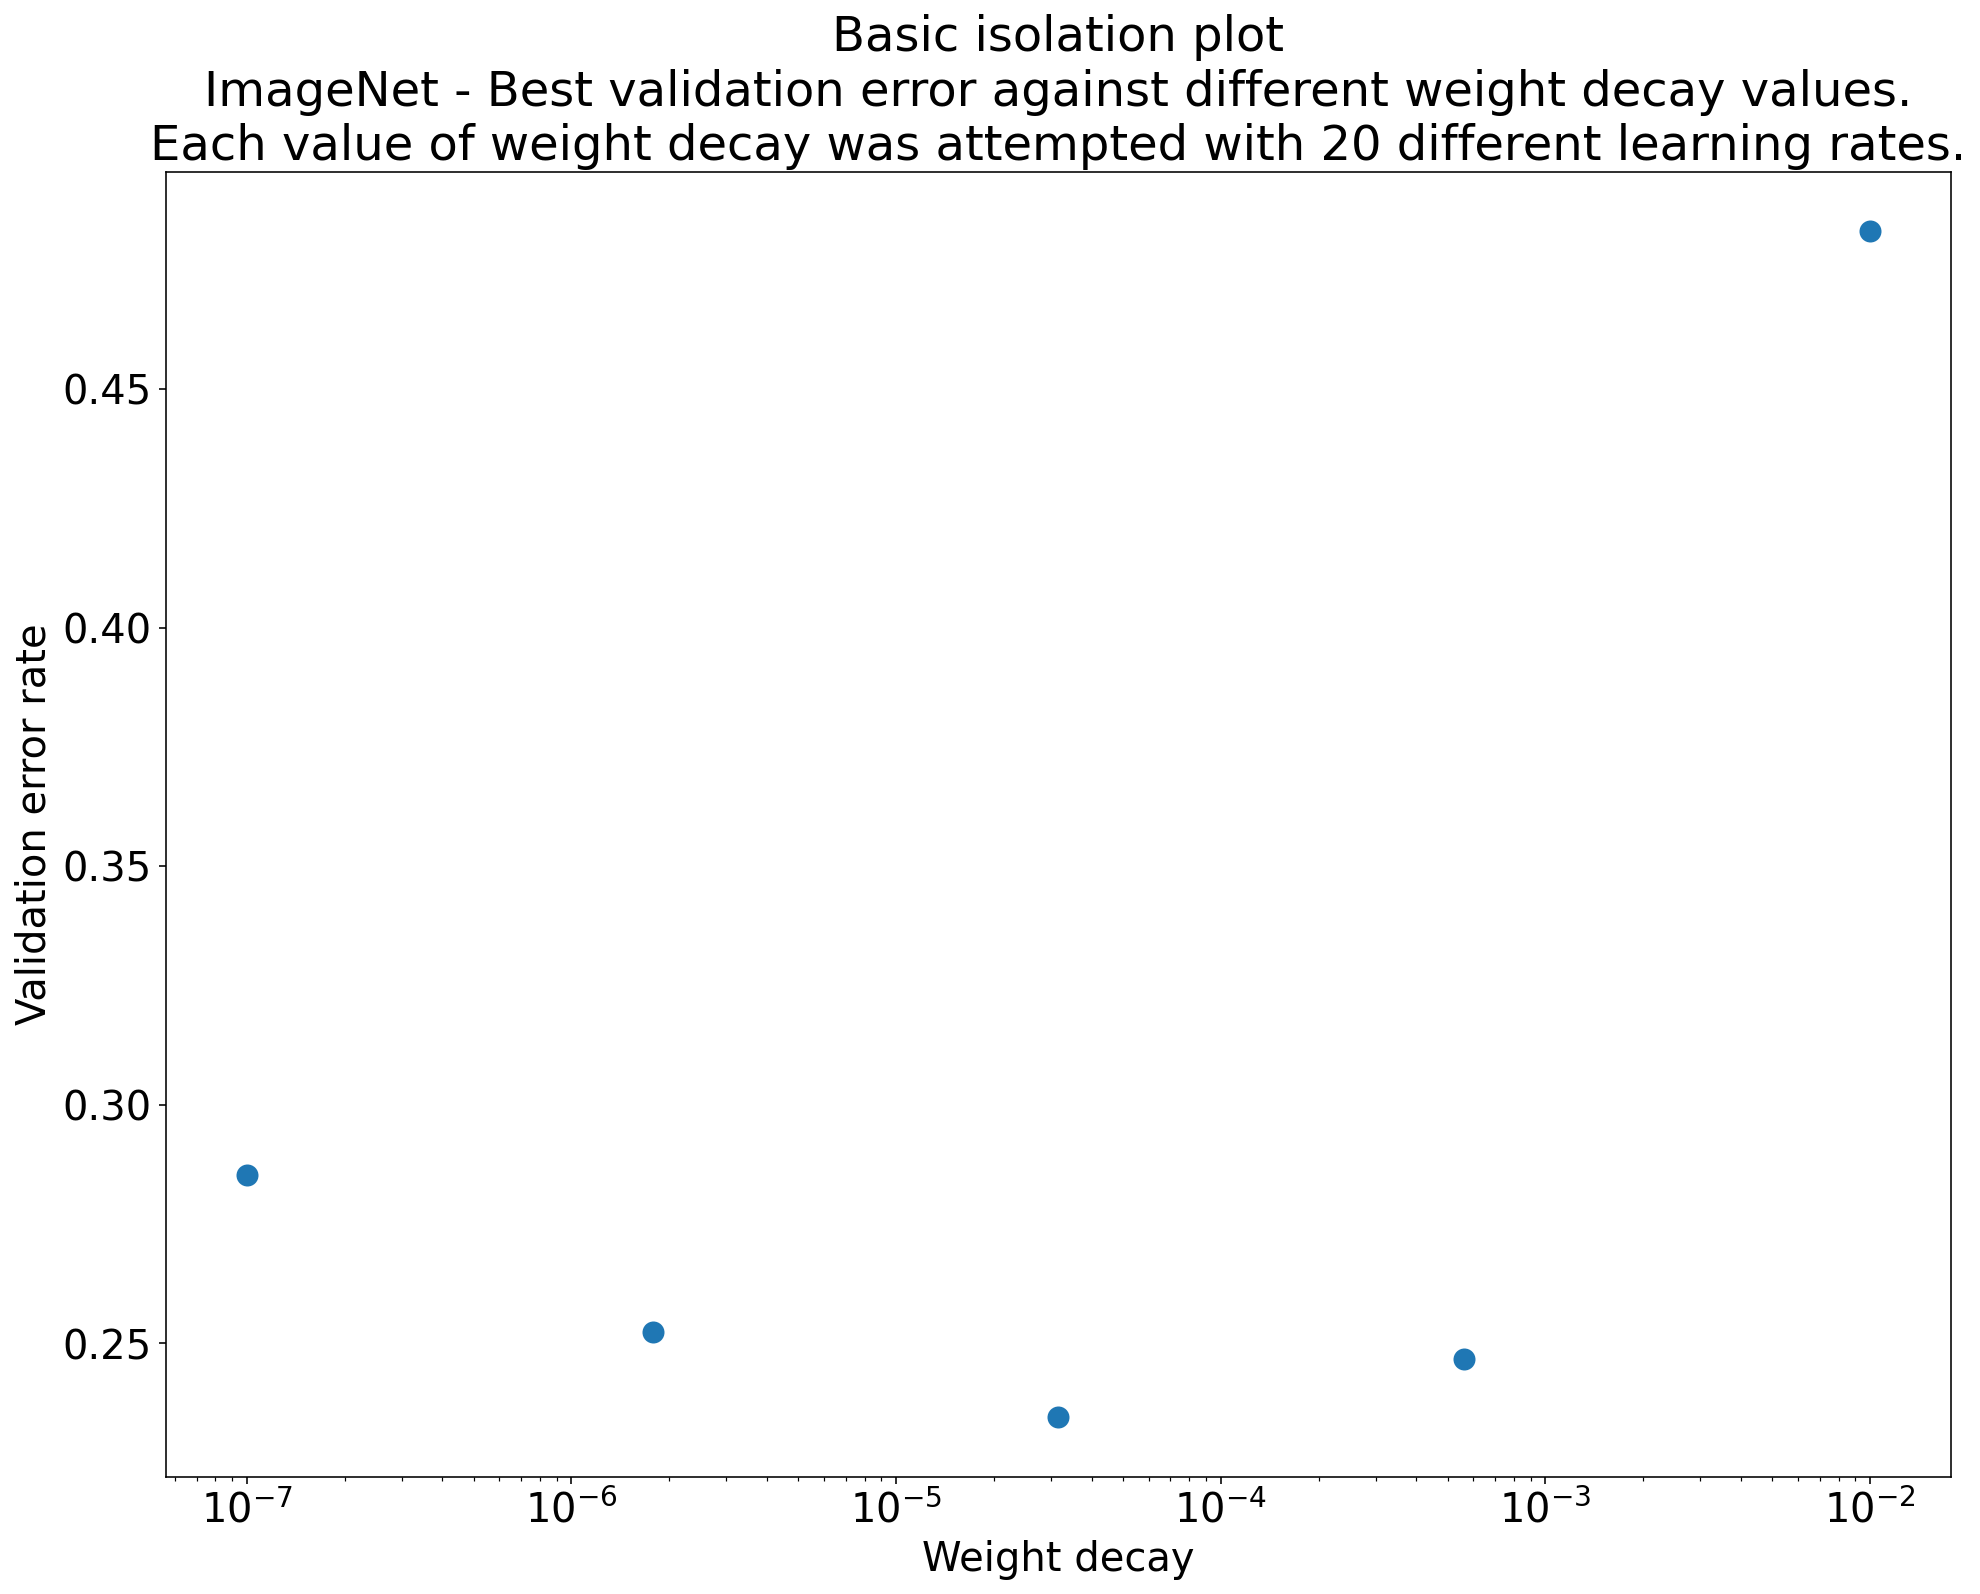 Isolation plot that investigates the best value of weight
          decay for ResNet-50 trained on ImageNet. In this case,
          the lowest validation error rate is when the weight decay
          is ~0.00005.